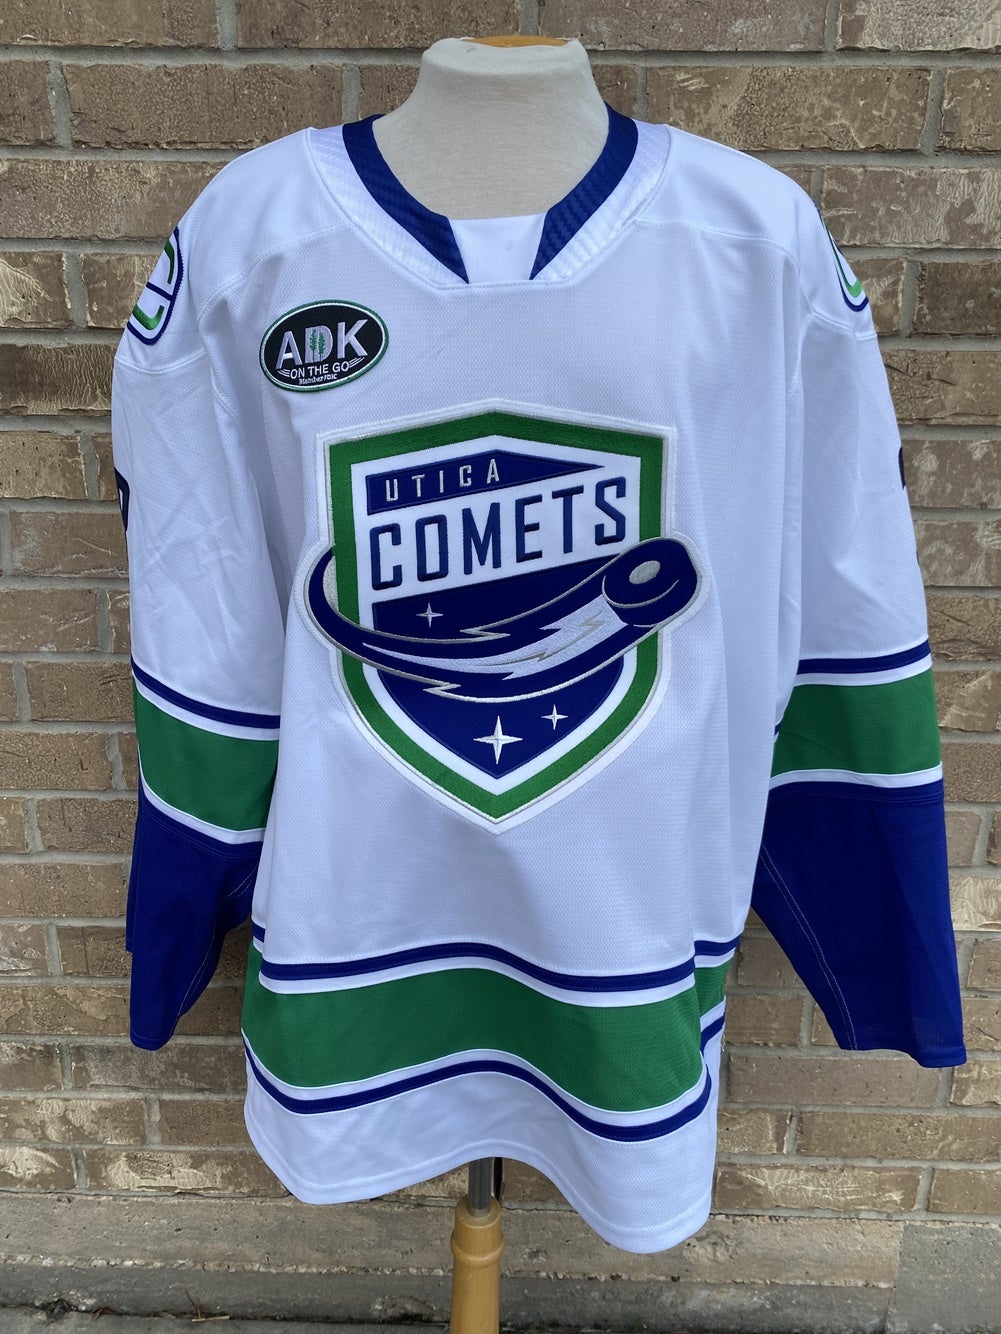 Utica Comets go green with new third jersey —